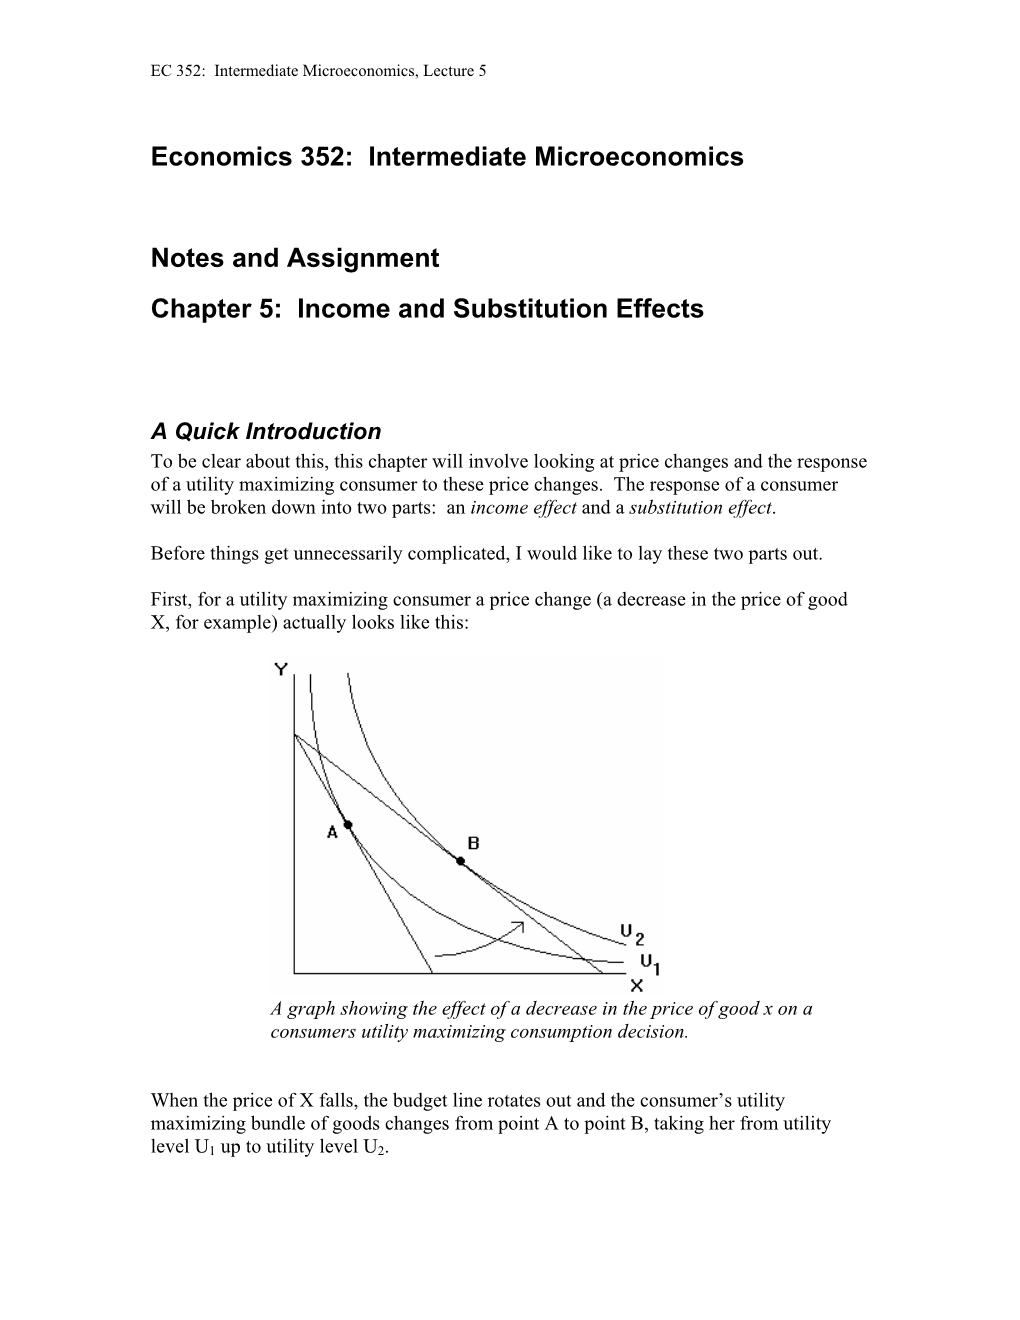 Chapter 5: Income and Substitution Effects